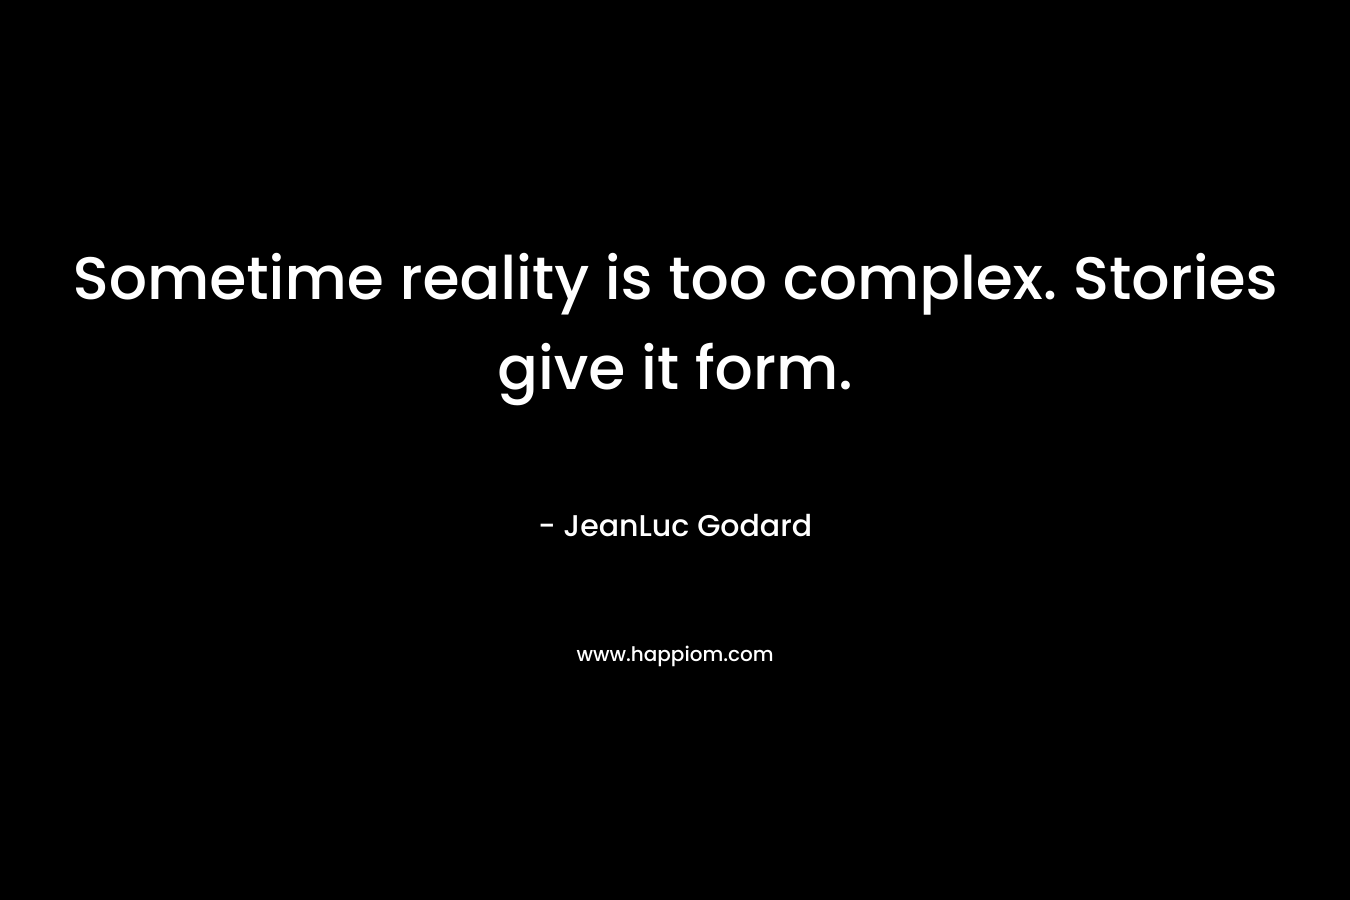 Sometime reality is too complex. Stories give it form.